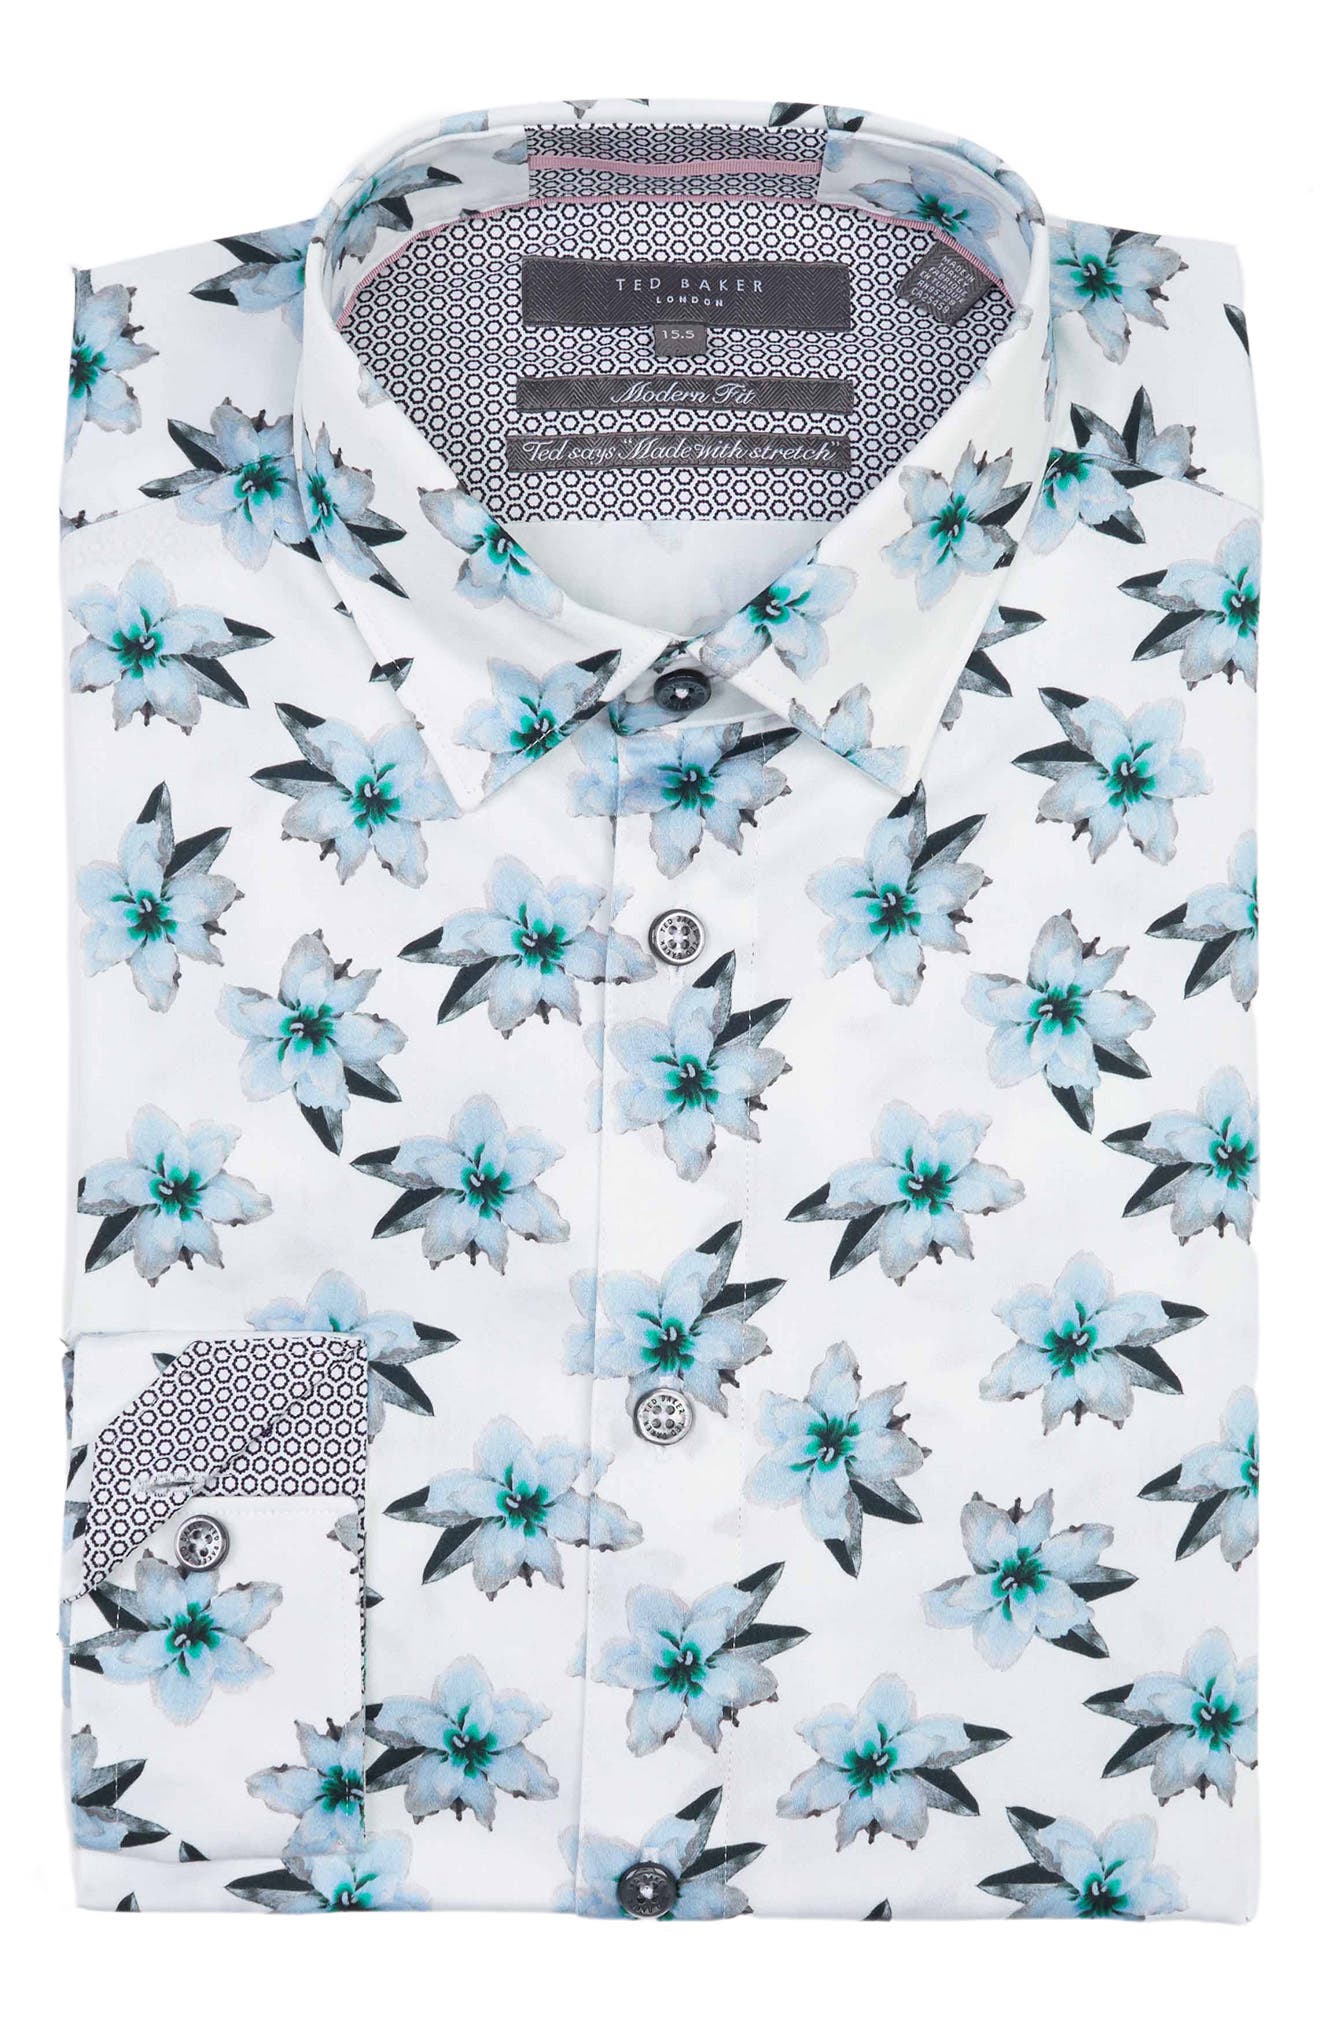 TED BAKER LONDON Floral Button-Up Dress Shirt in White